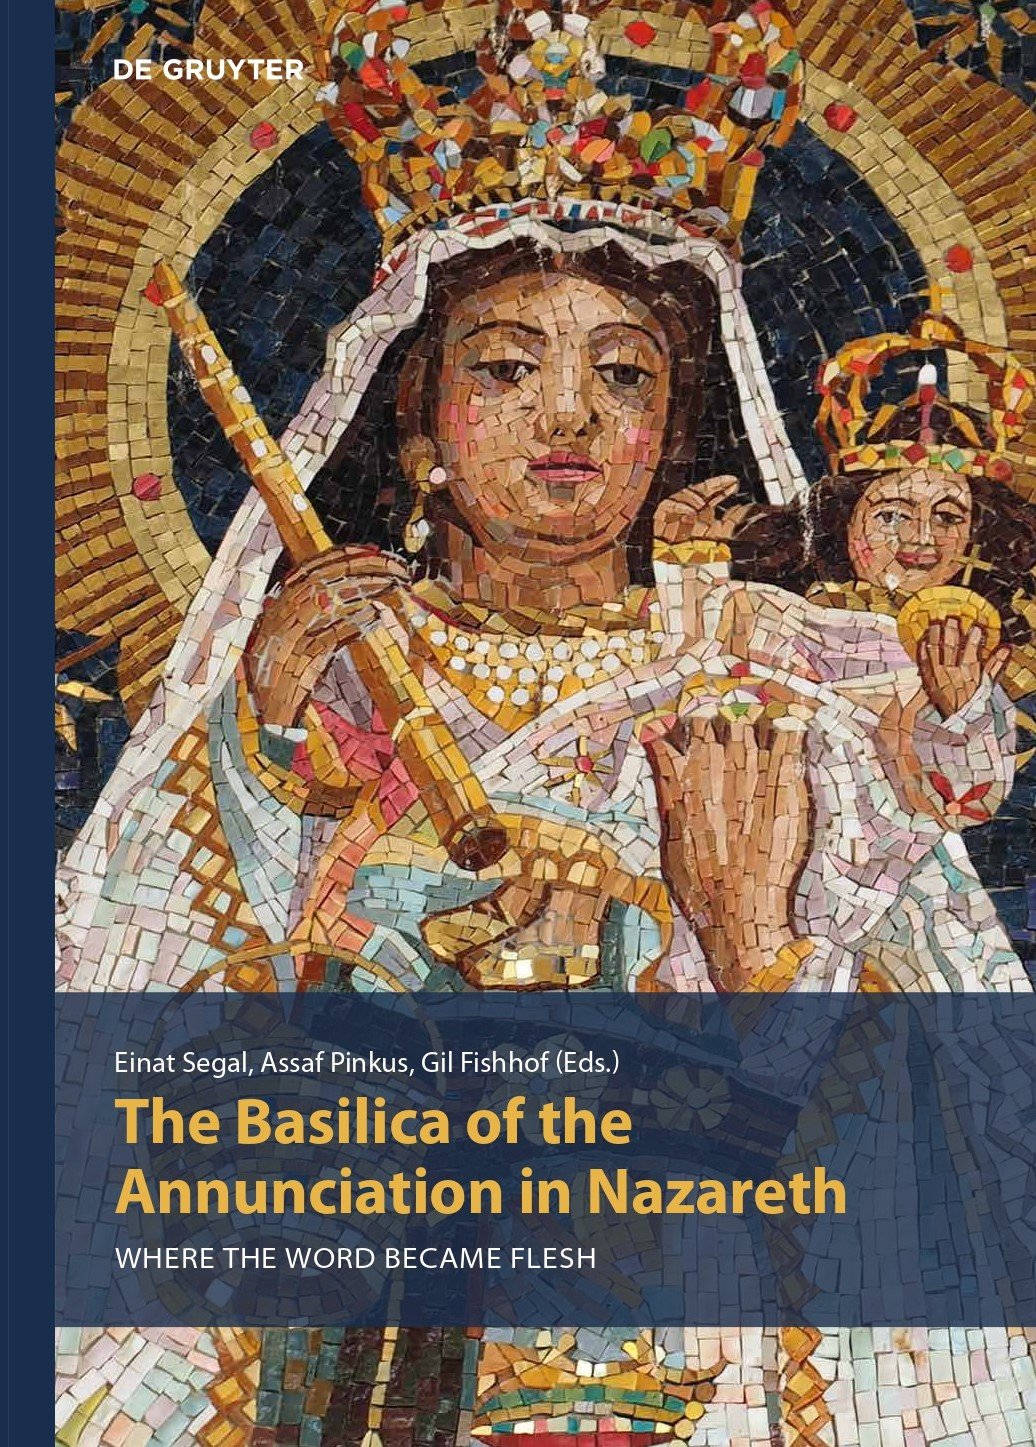 The Basilica of the Annunciation in Nazareth: Where the Word became Flash, DeGruyter, 2020